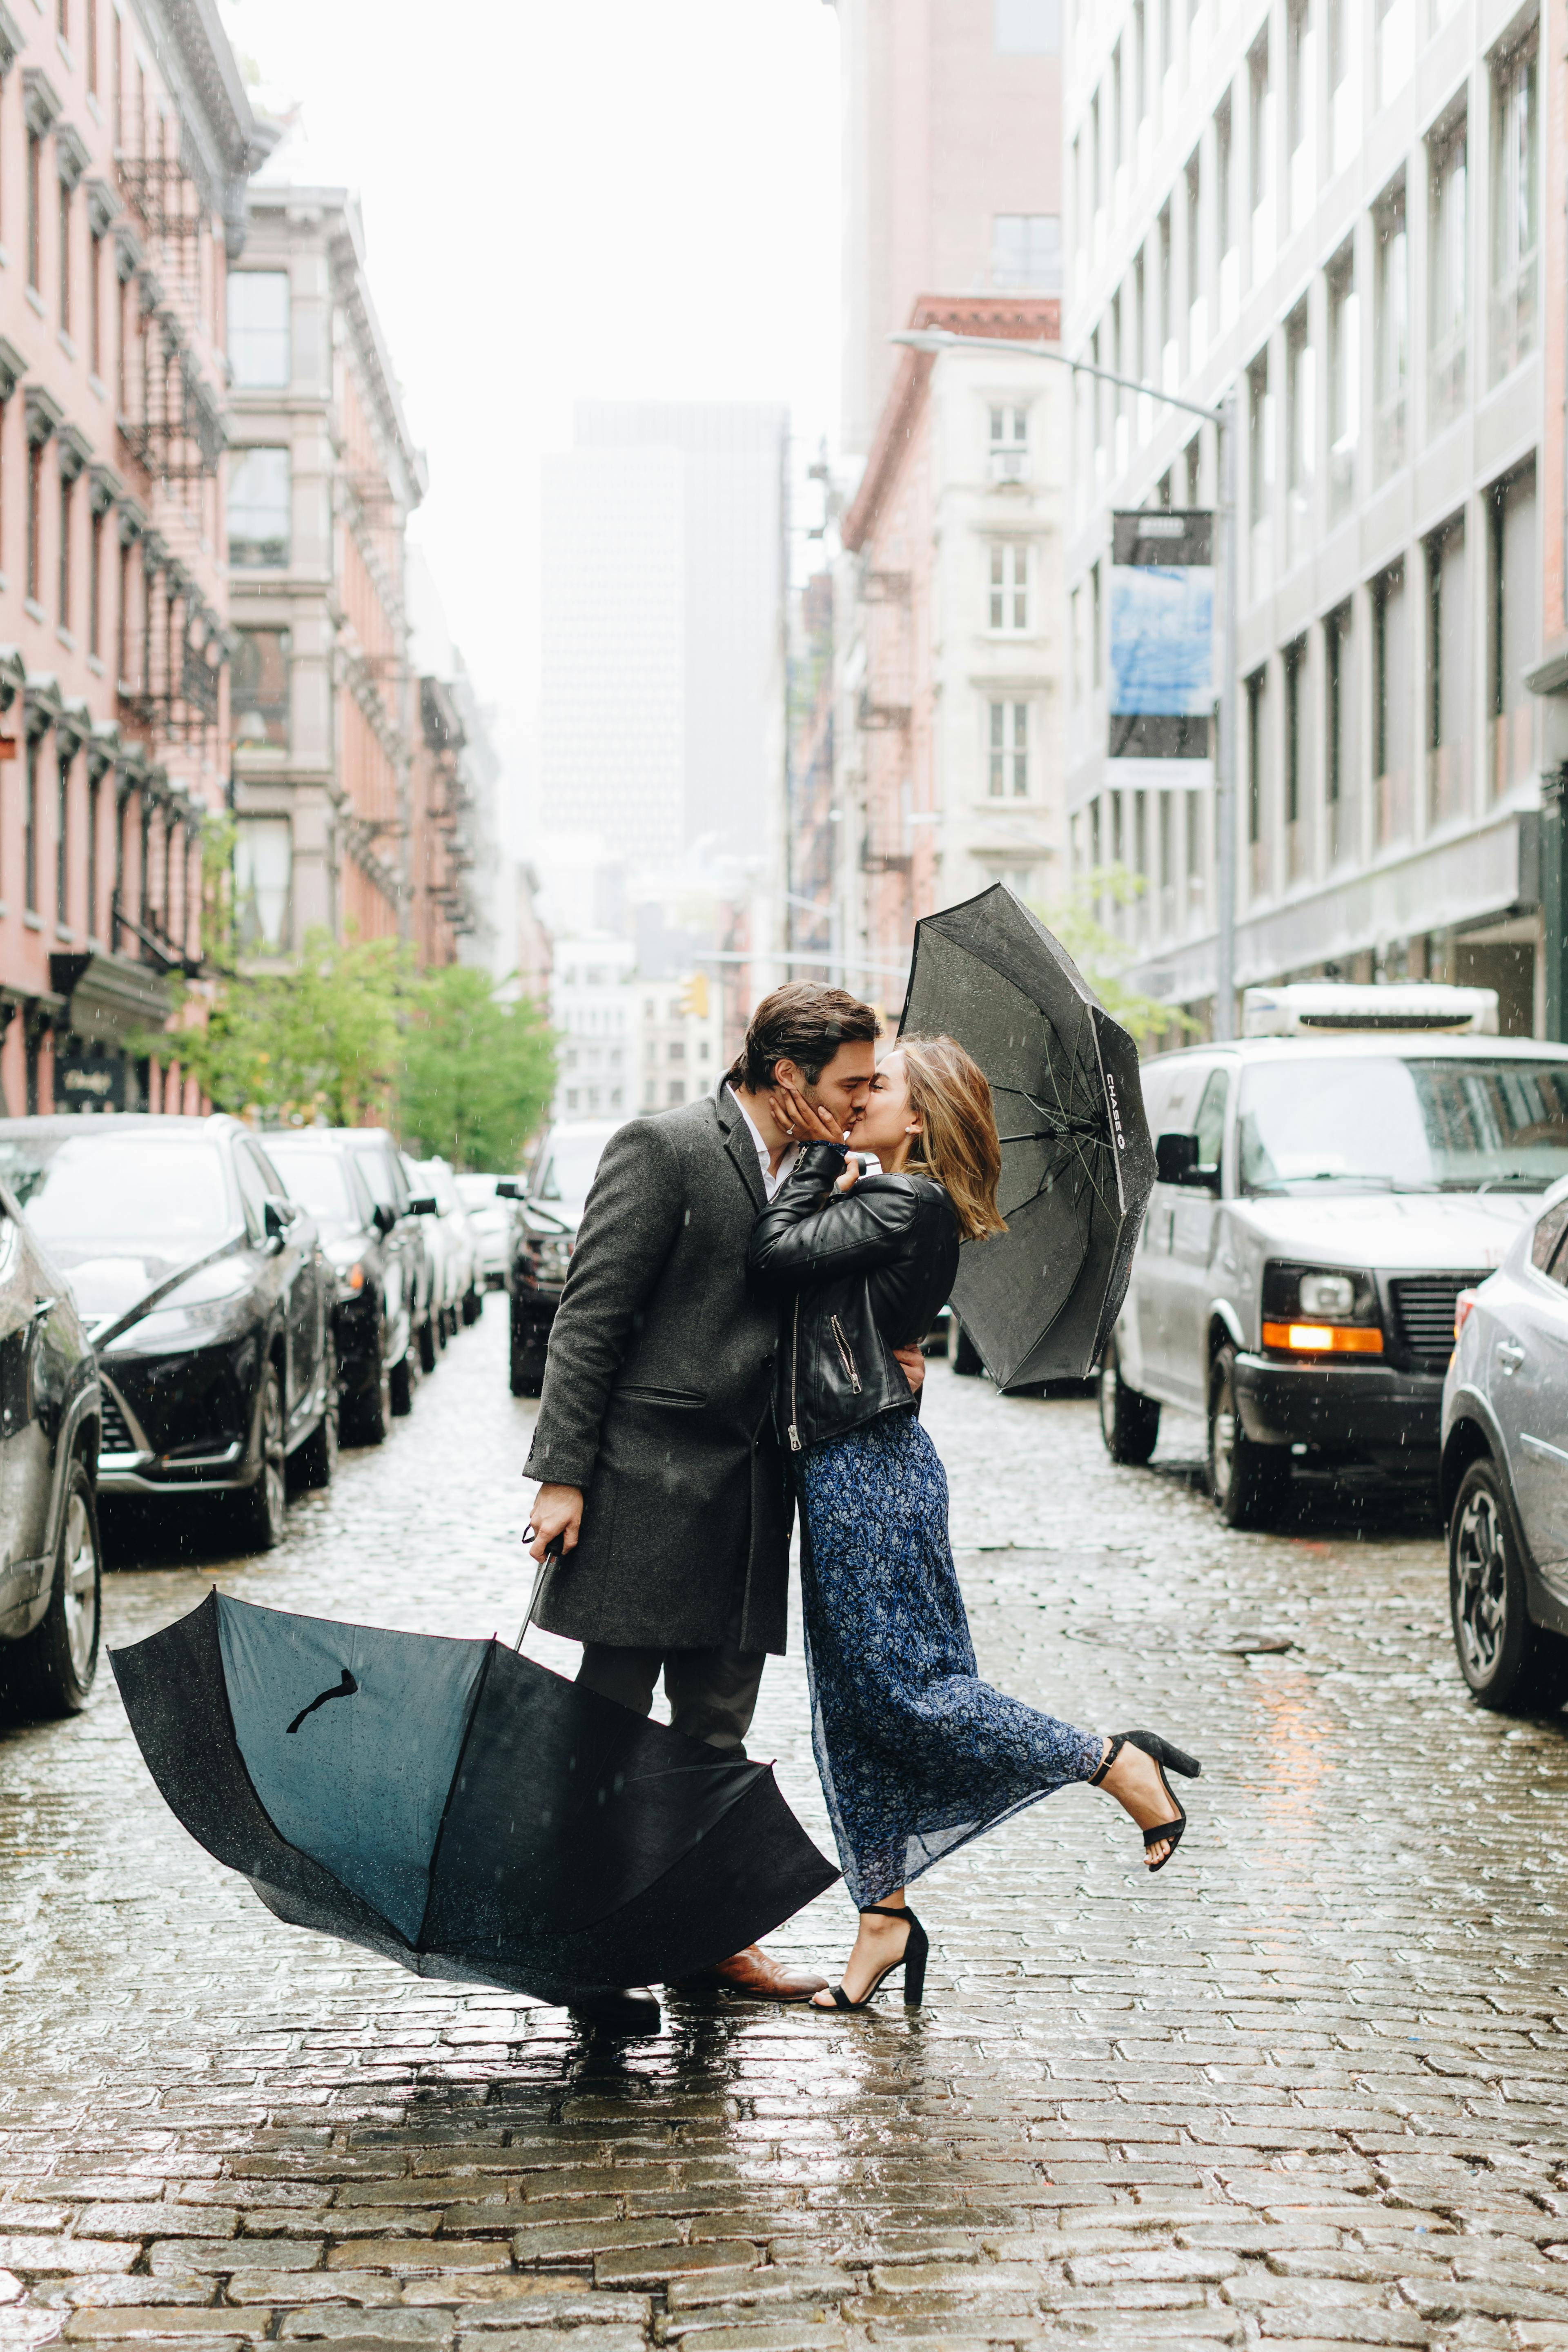 Couple sharing a romantic kiss on a rainy street with umbrellas.